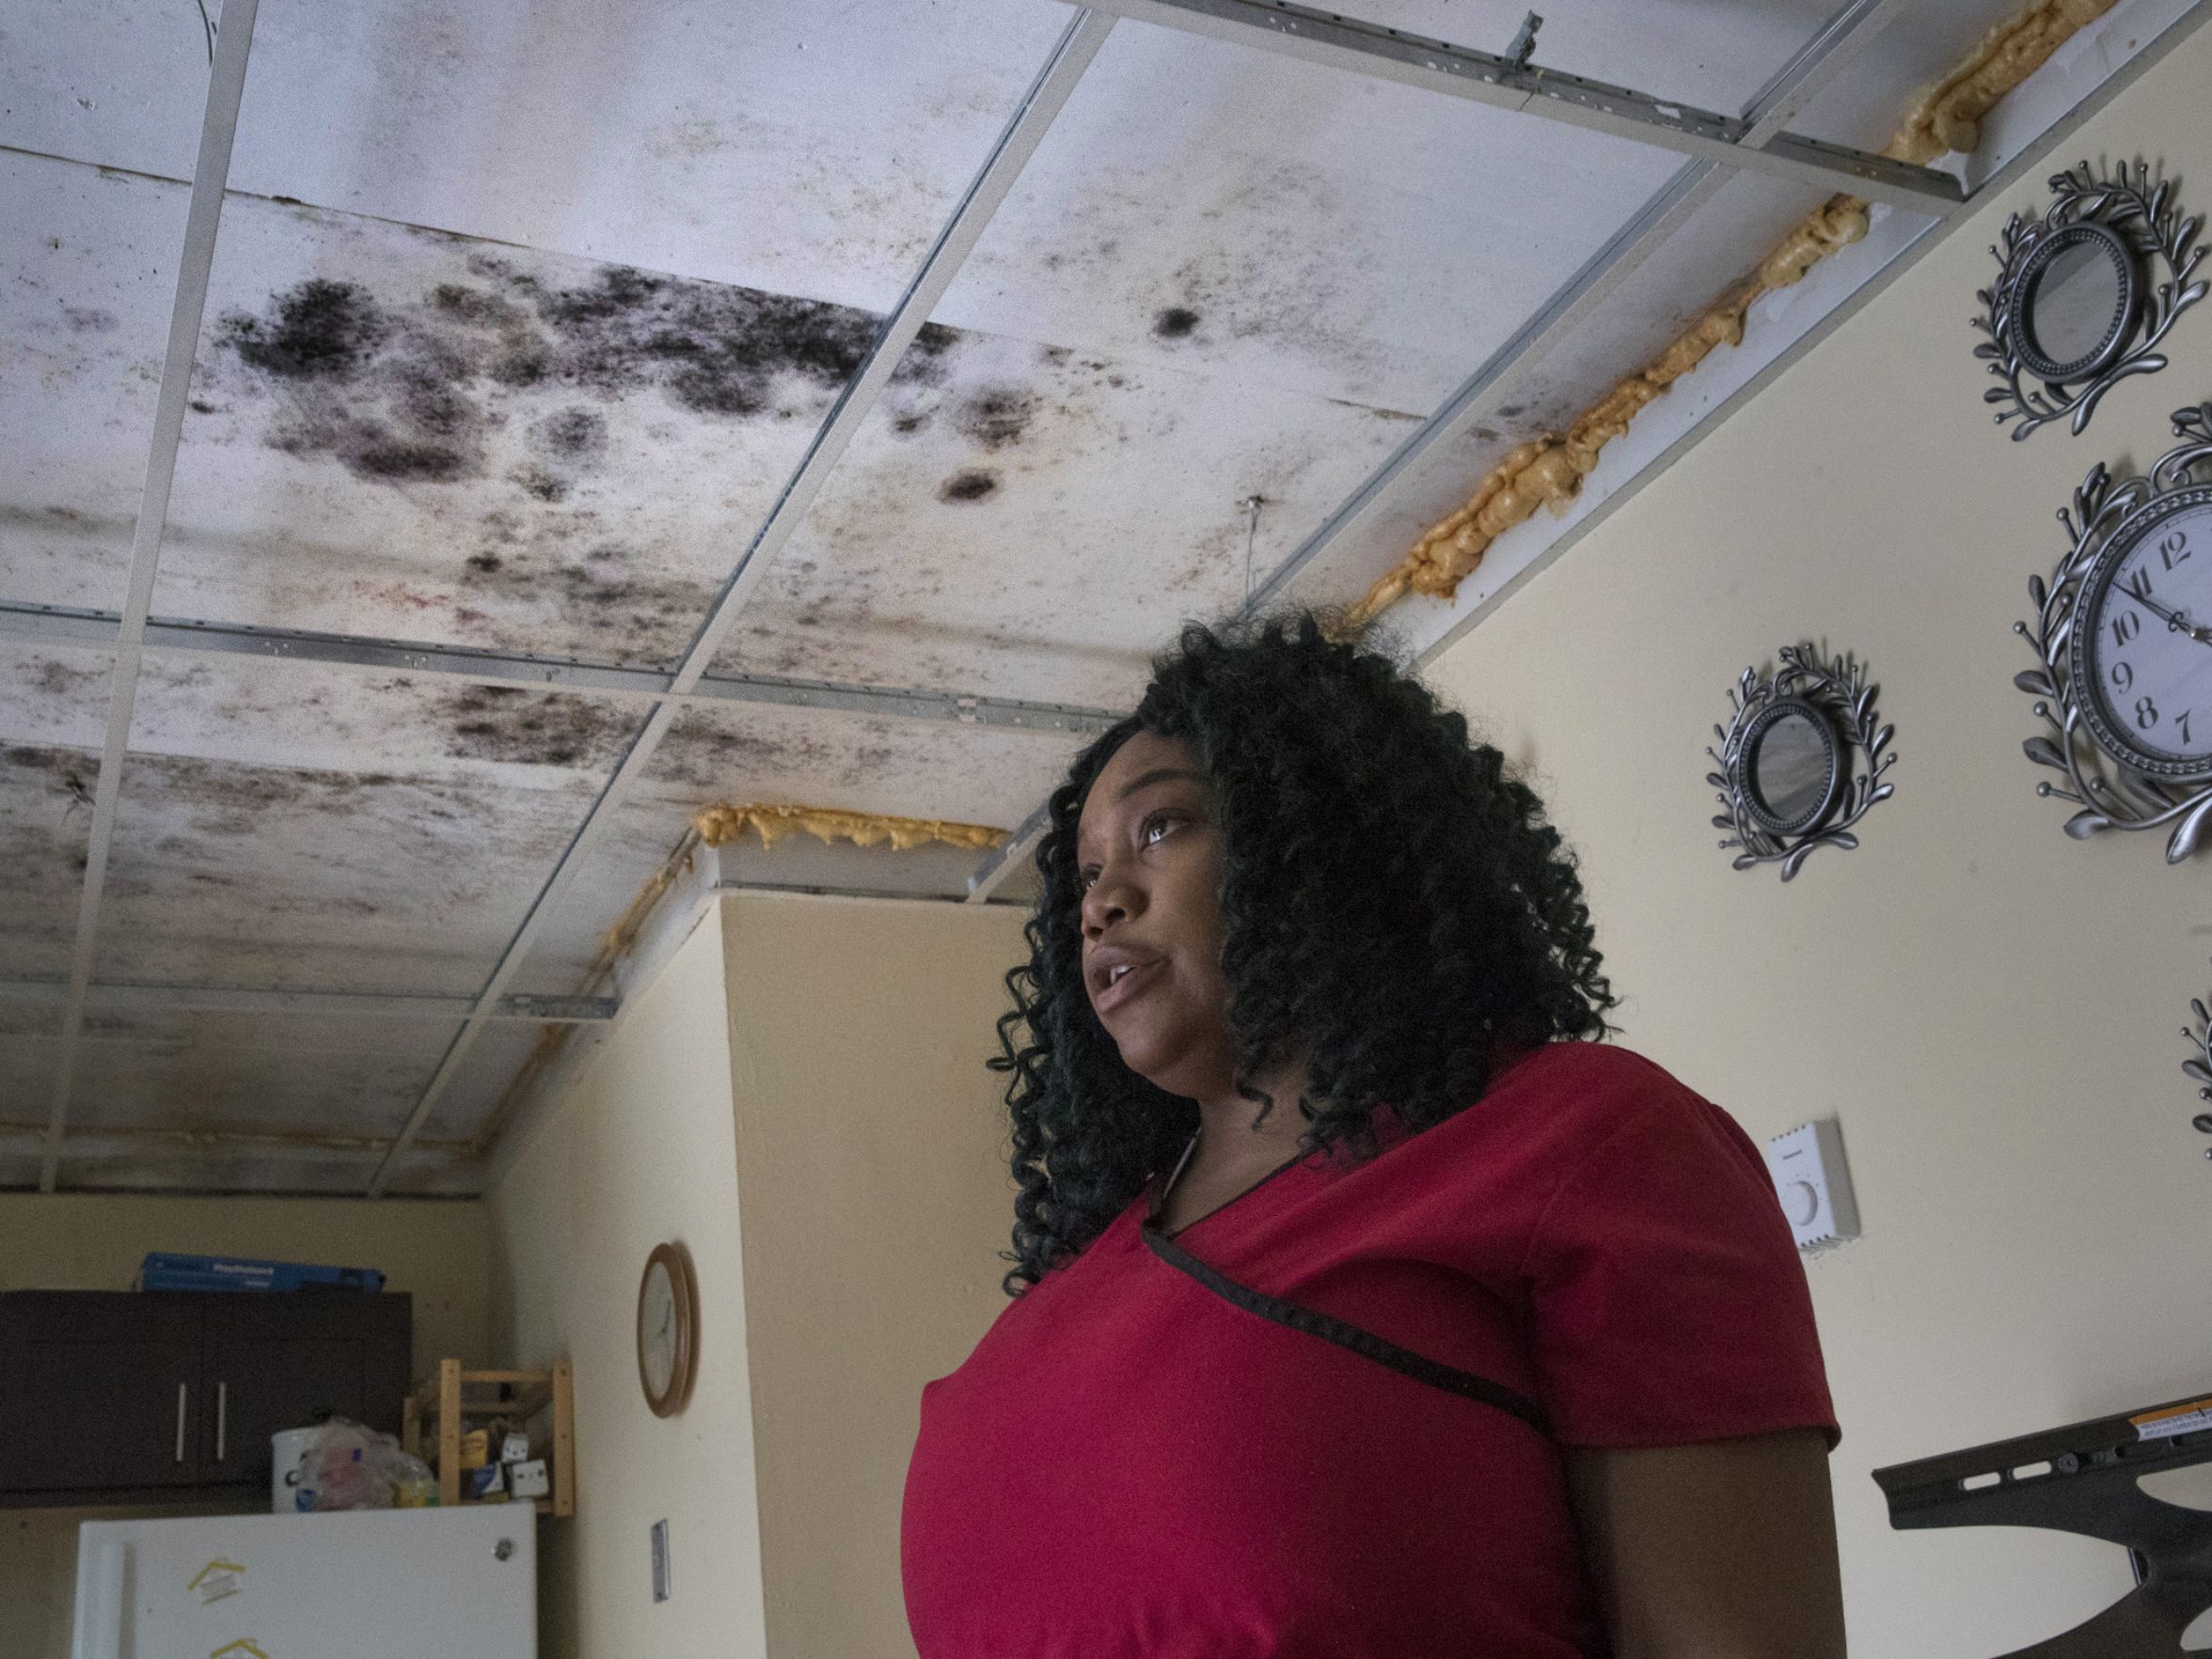 Mold plagues NJ renters who have nowhere to turn